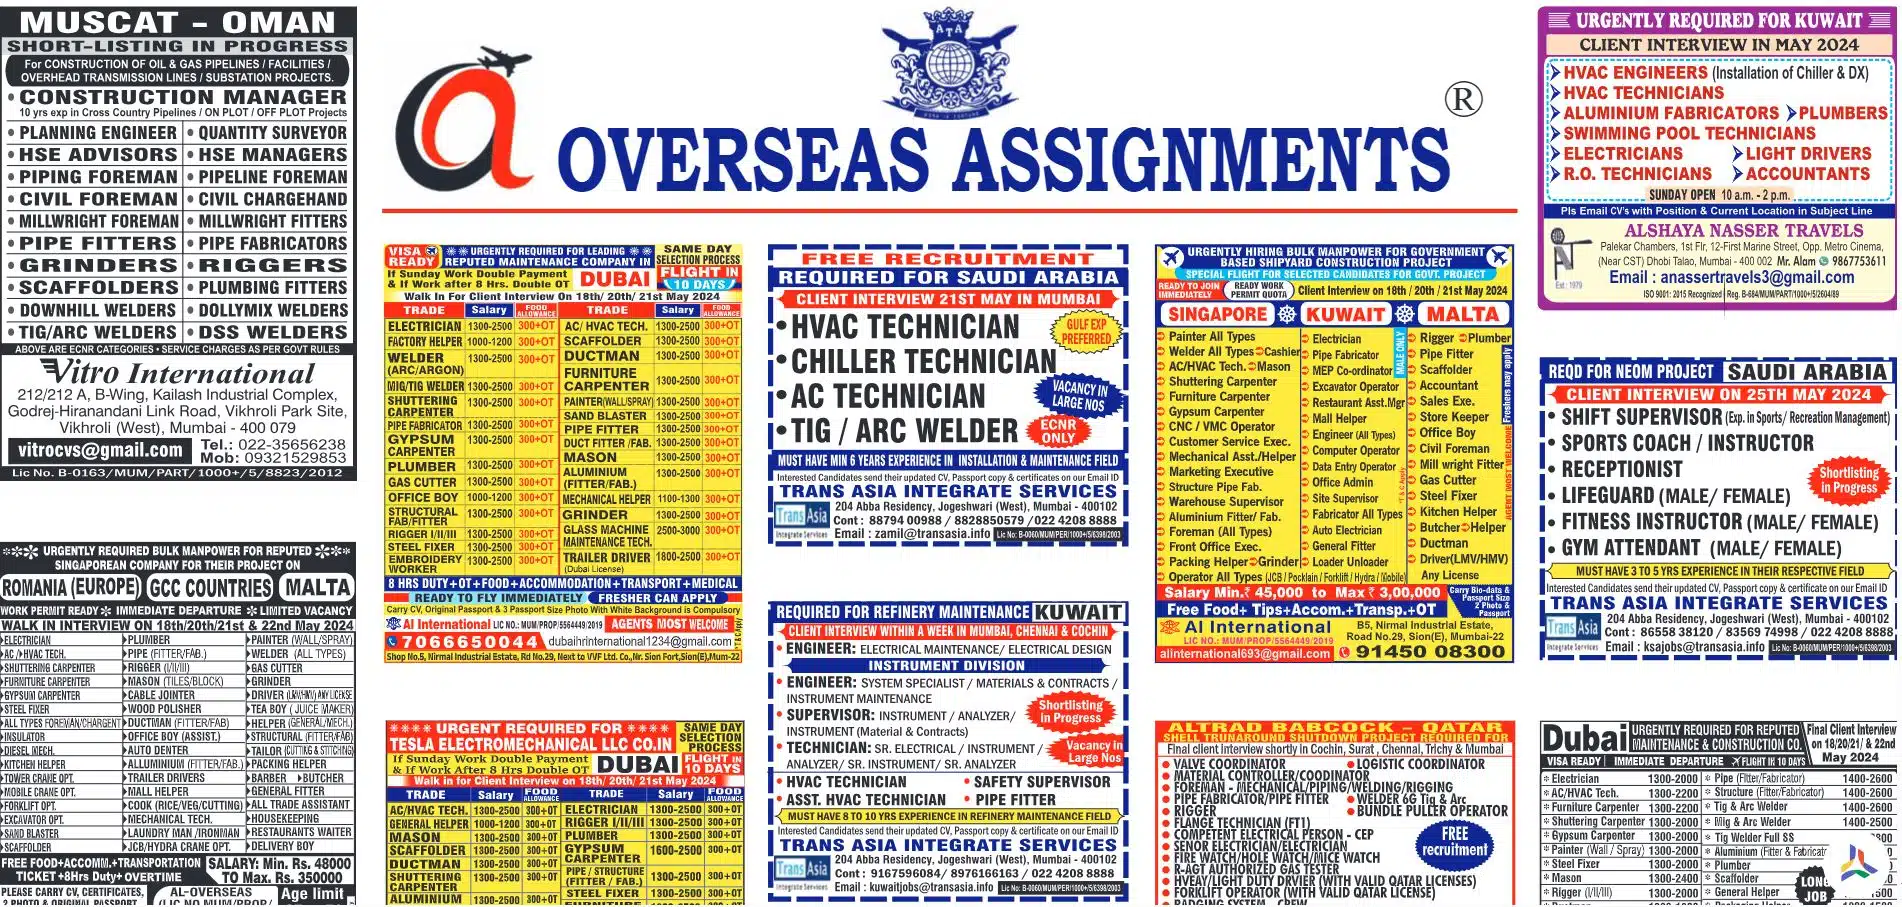 assignment abroad times official website